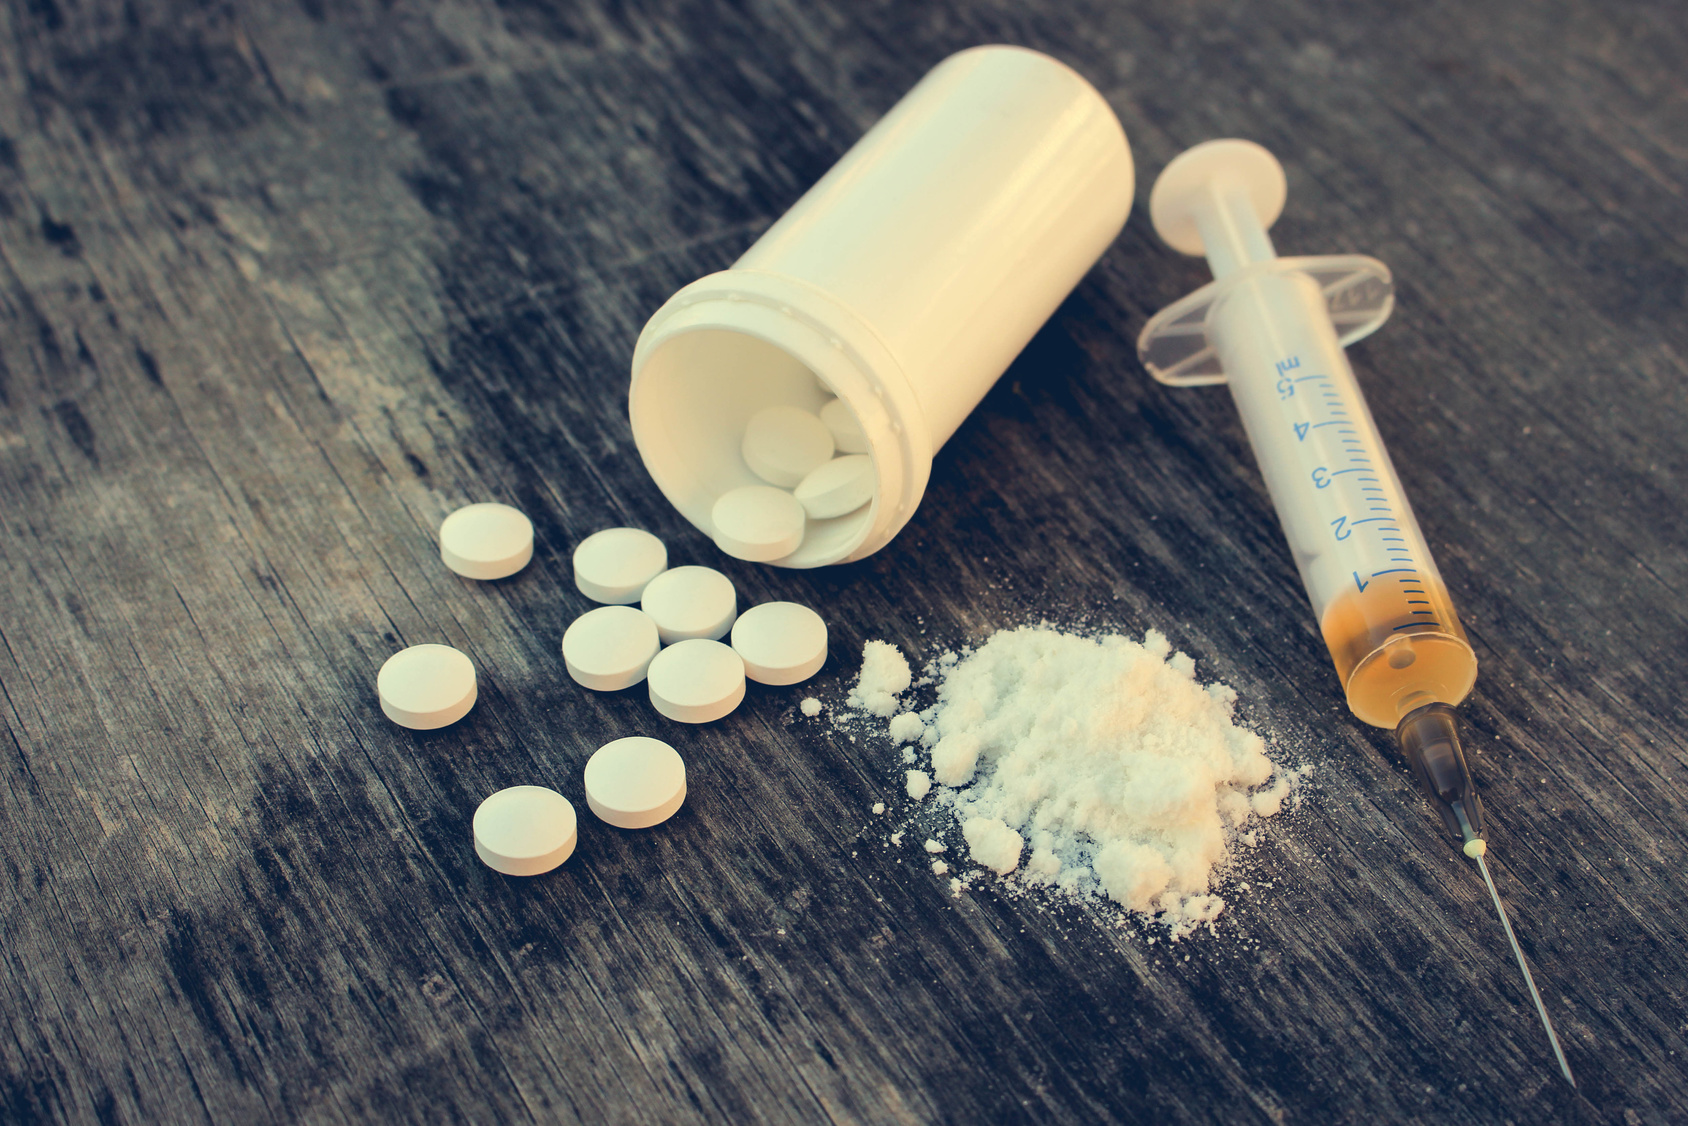 Deadly U.S. Heroin Overdoses Quadrupled in 5 Years